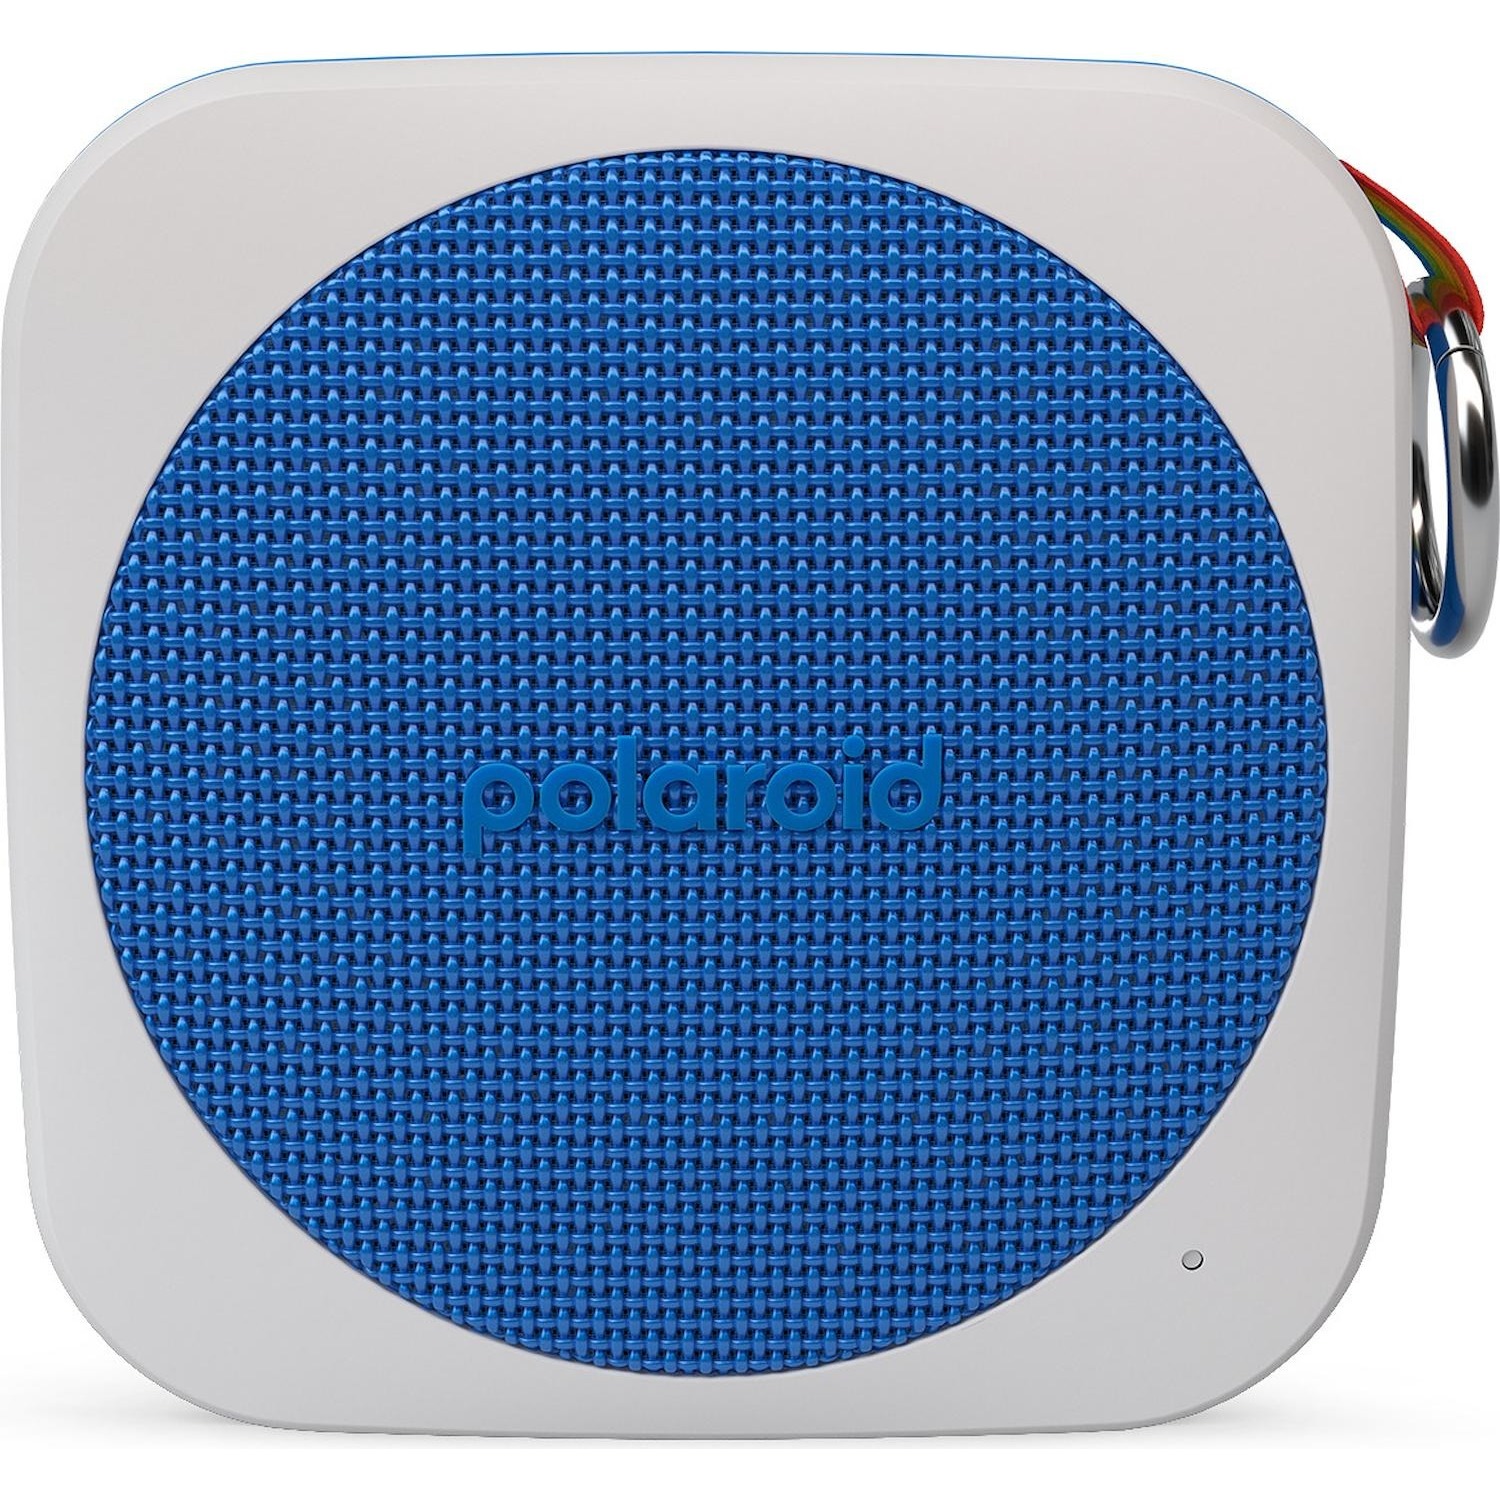 Image of Polaroid P1 Music Player (Blue) - Super Portable Wireless Bluetooth Speaker Rechargeable with IPX5 Waterproof and Dual Stereo Pairing Polaroid P1 Music Player (Blue) - Super Portable Wireless Bluetooth Speaker Rechargeable with IPX5 Waterproof and Dual St